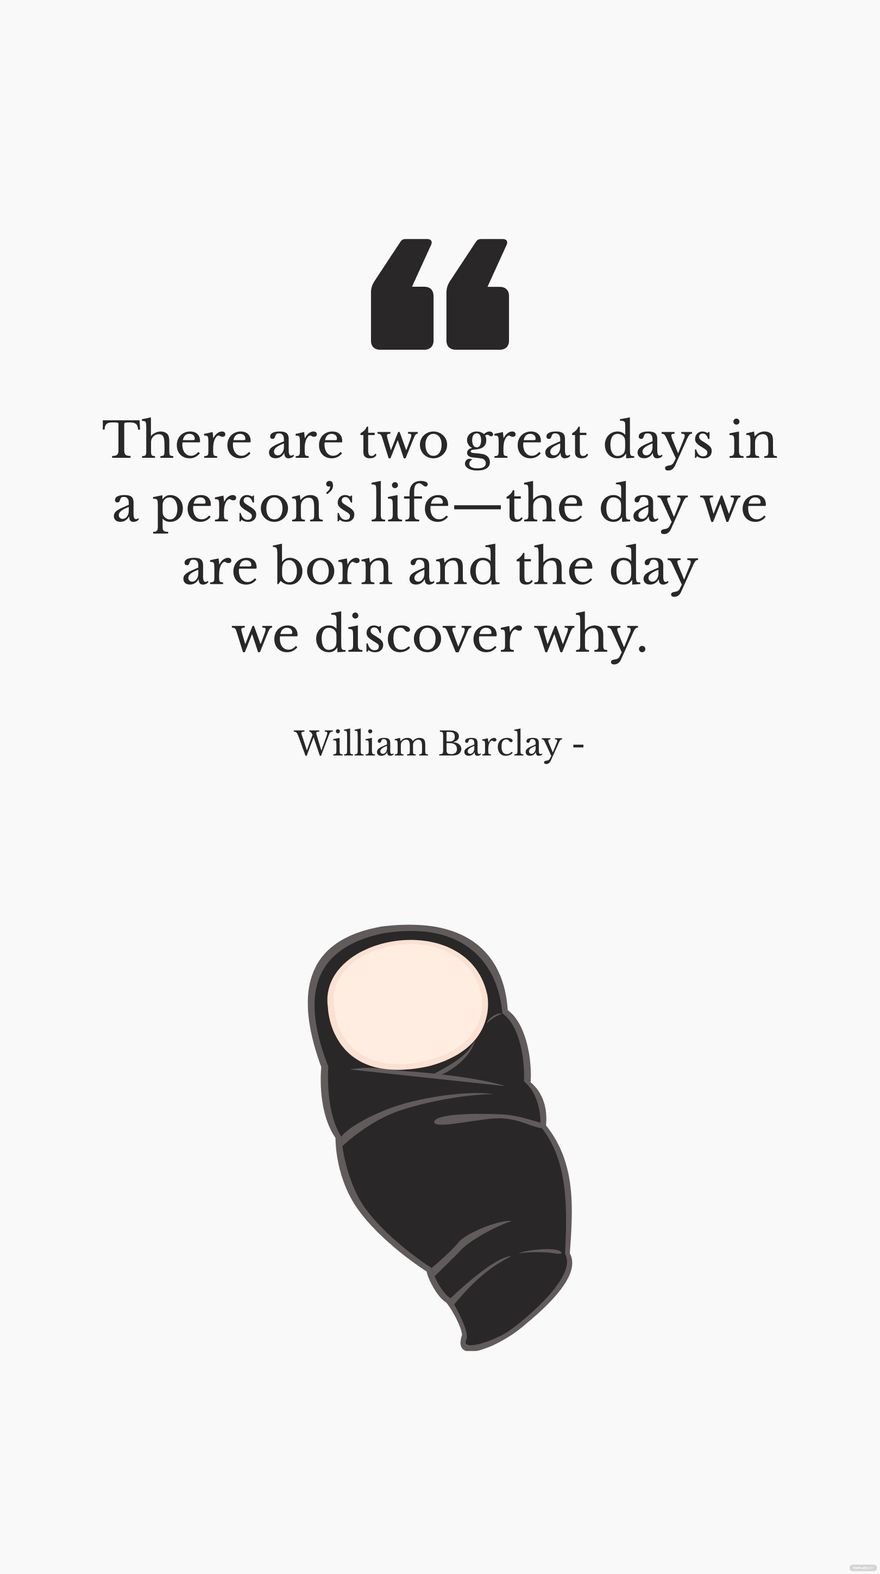 Free William Barclay - There are two great days in a person’s life—the day we are born and the day we discover why.